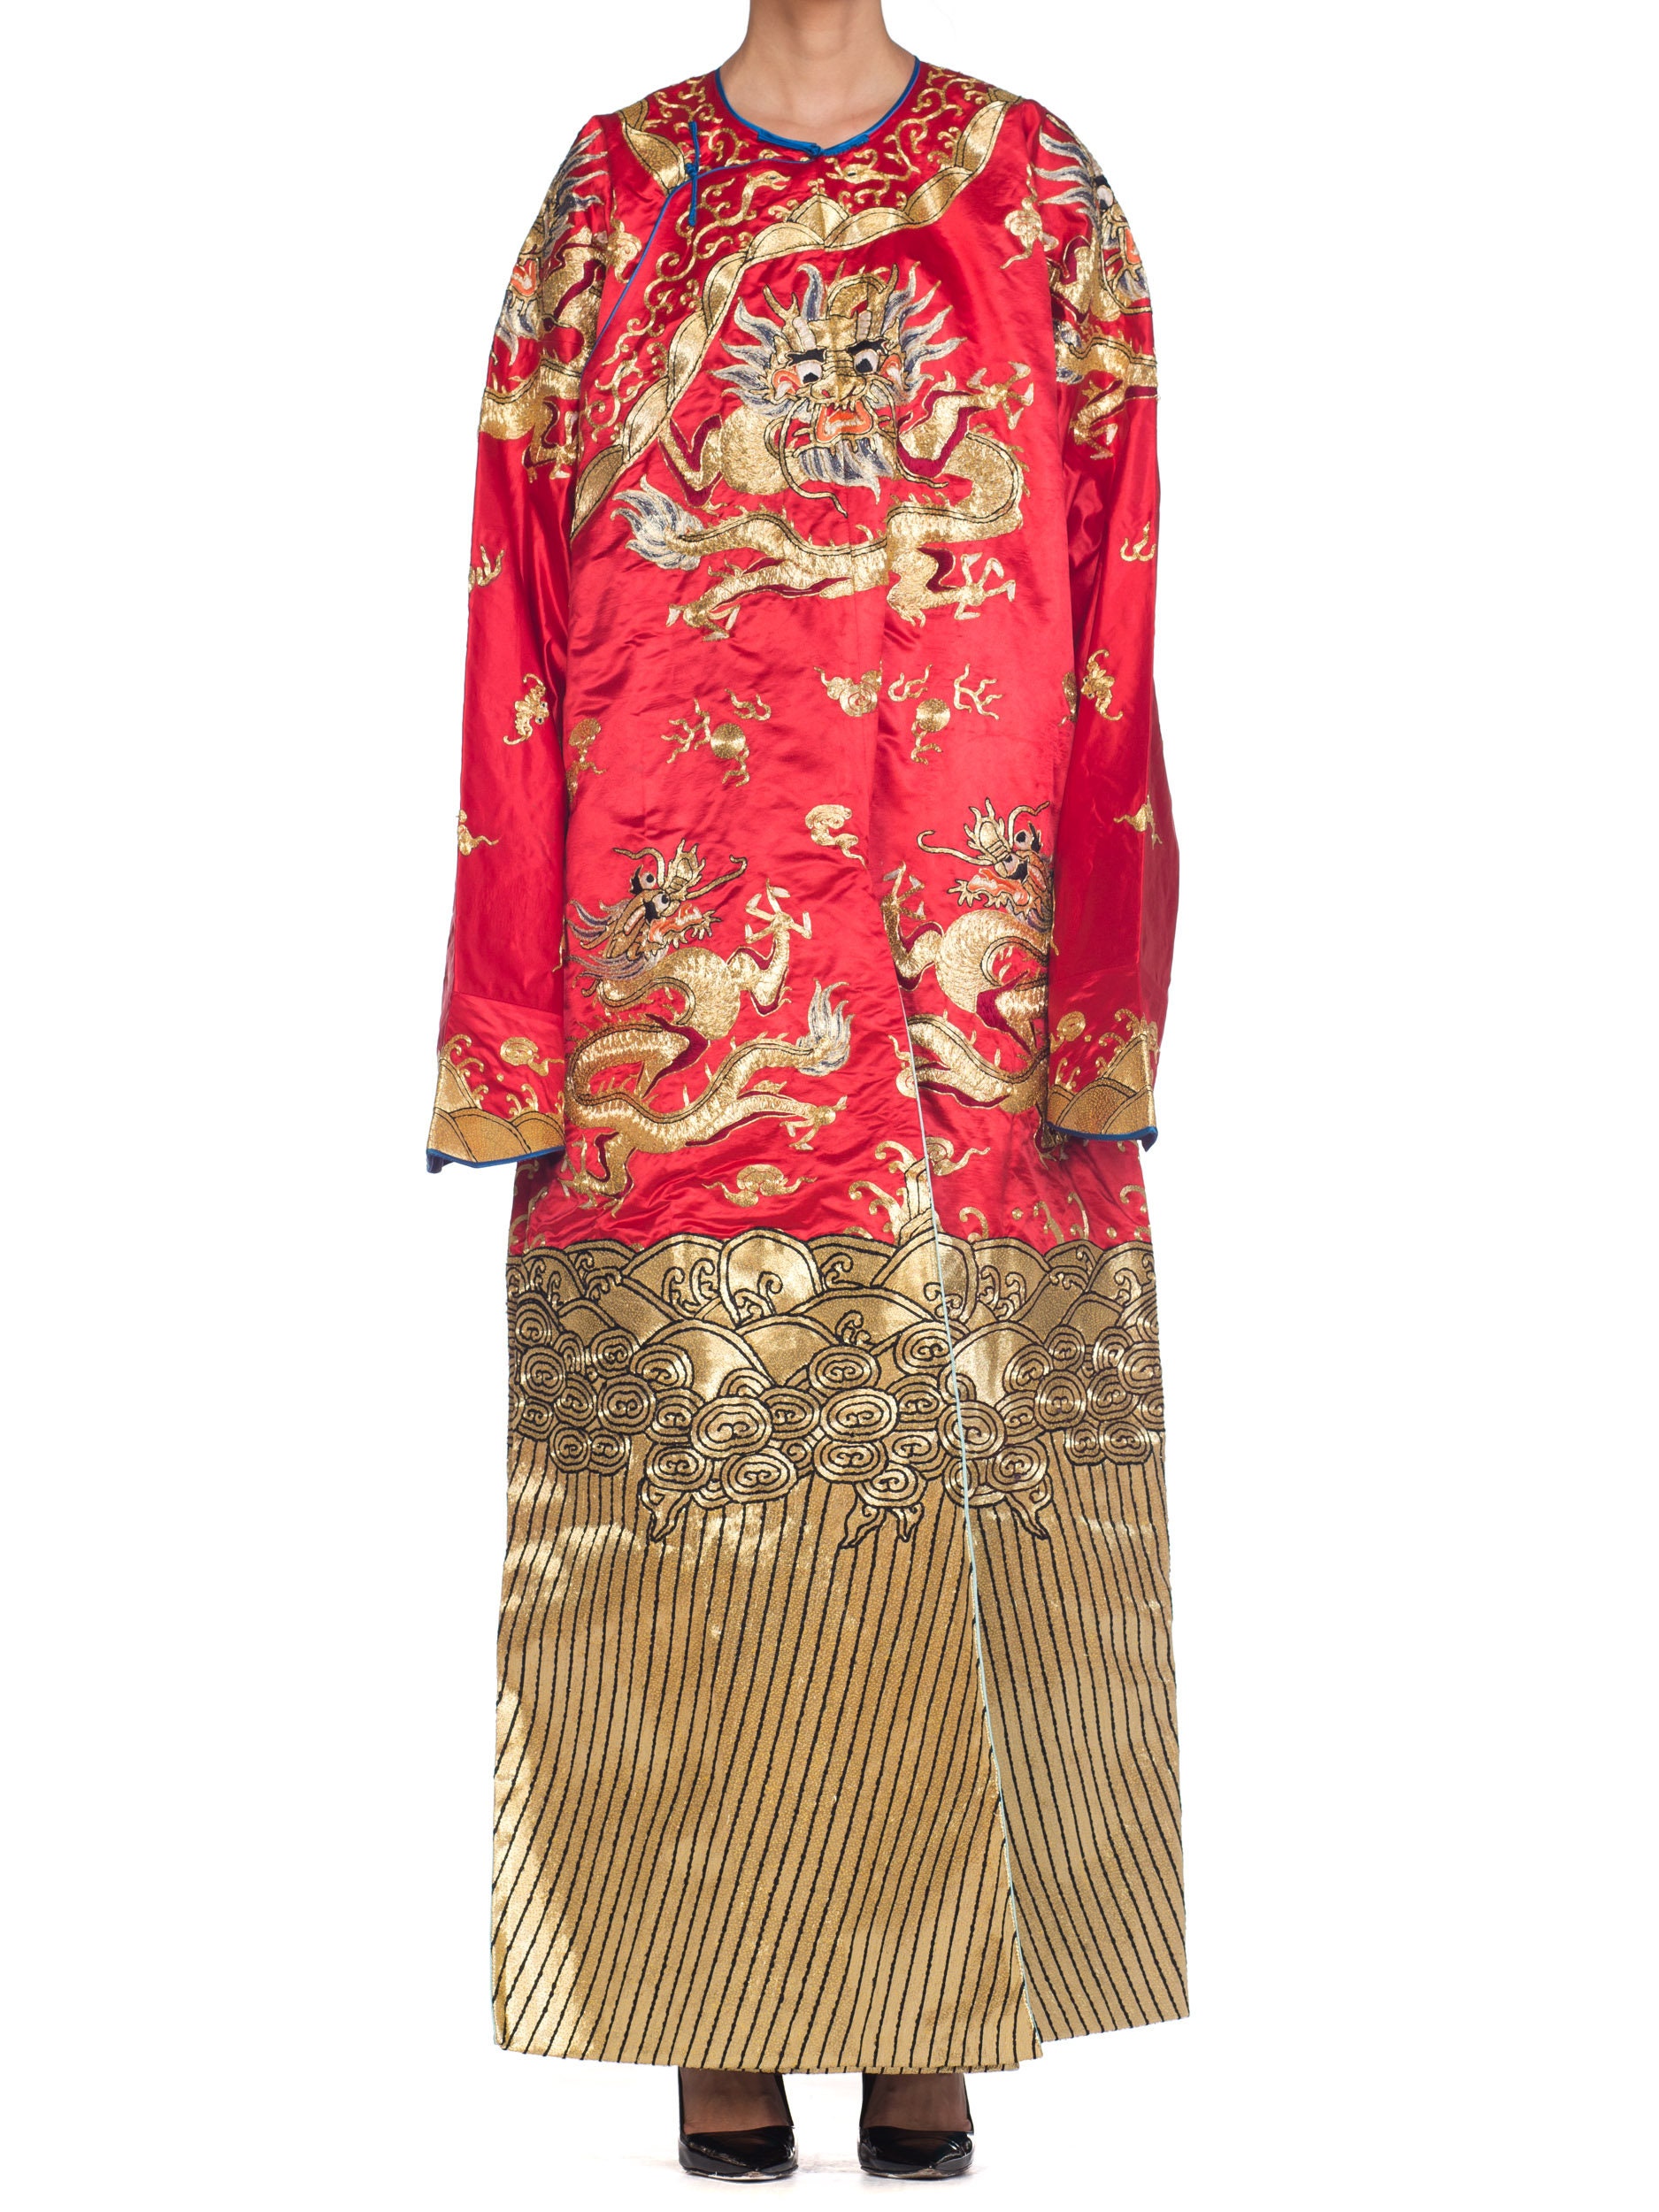 Metallic-golden Dragons Embroidered Red Chinese Opera Robe - Etsy